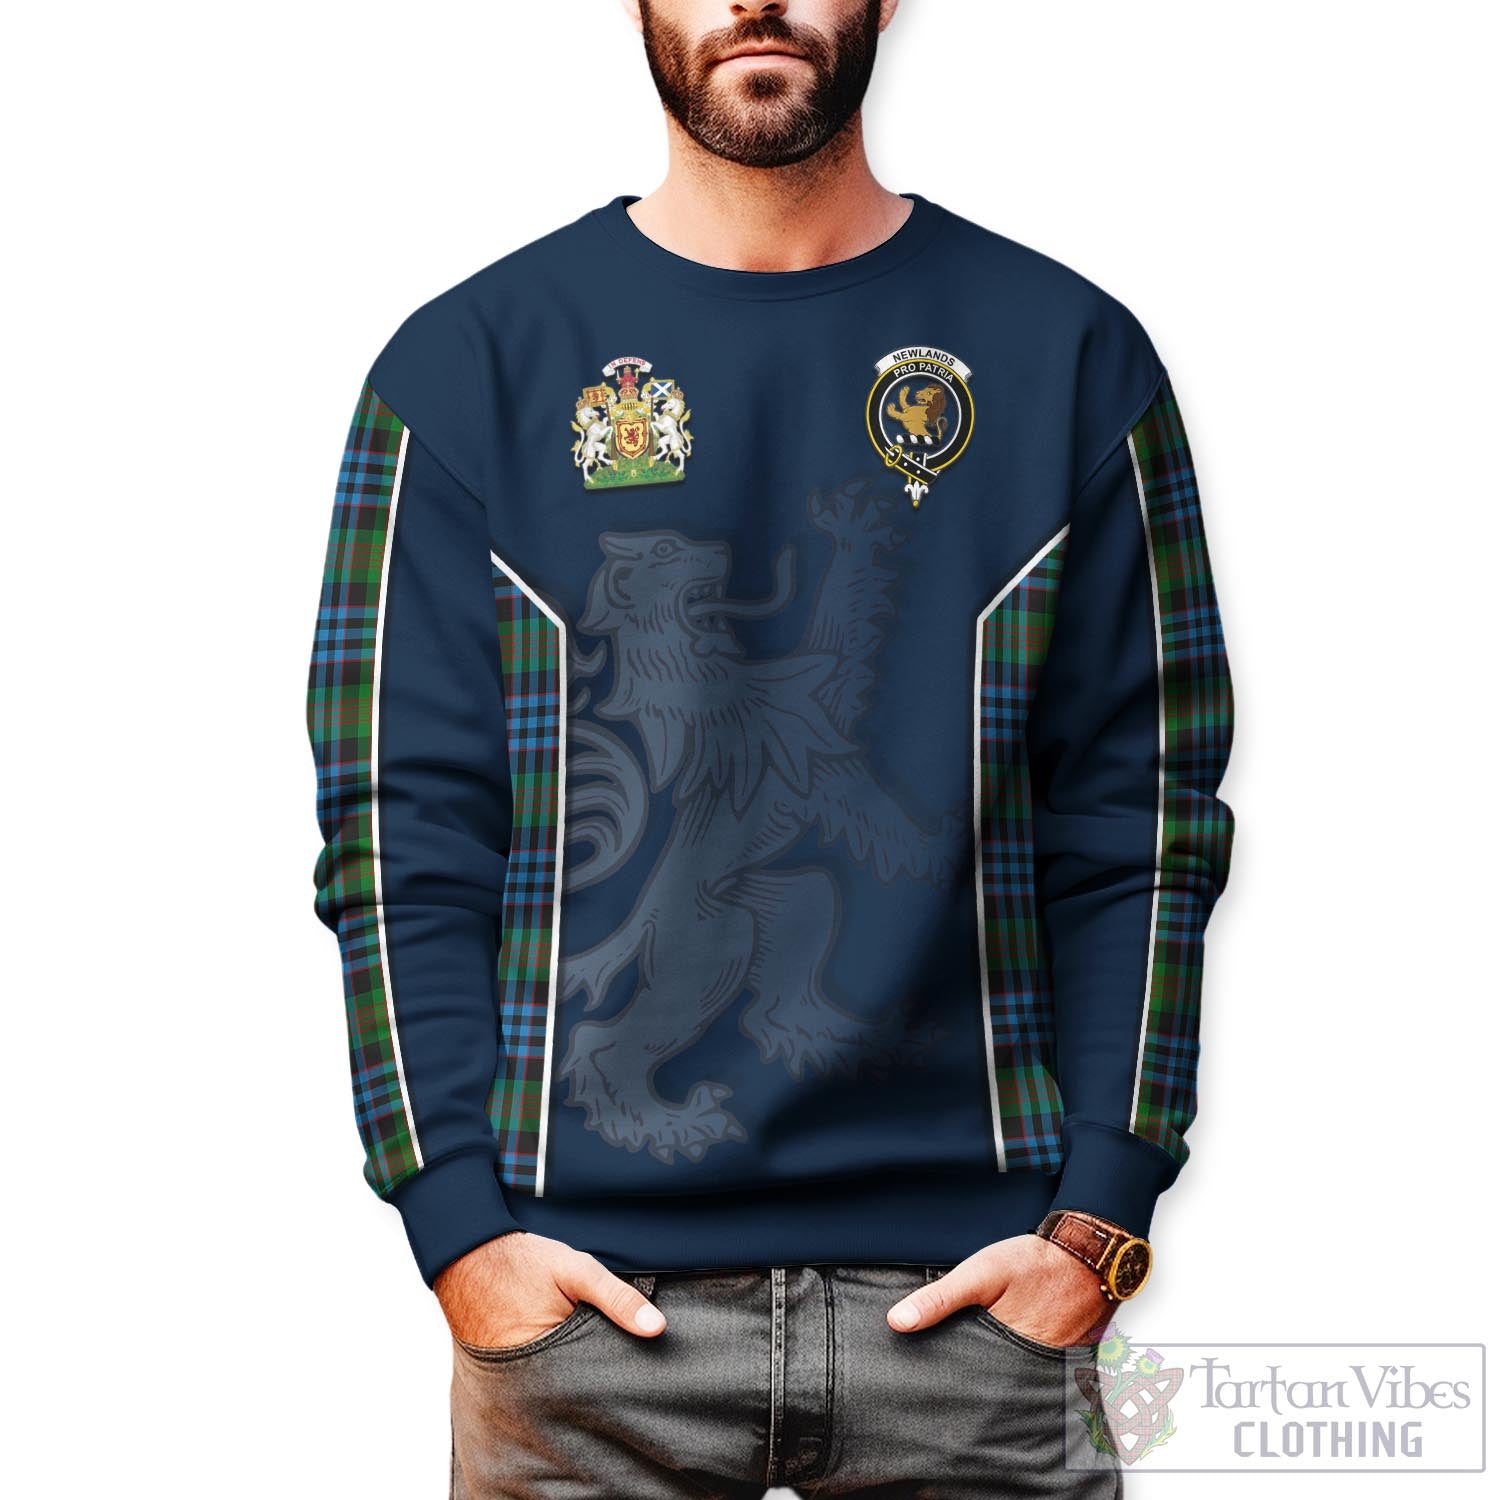 Tartan Vibes Clothing Newlands of Lauriston Tartan Sweater with Family Crest and Lion Rampant Vibes Sport Style